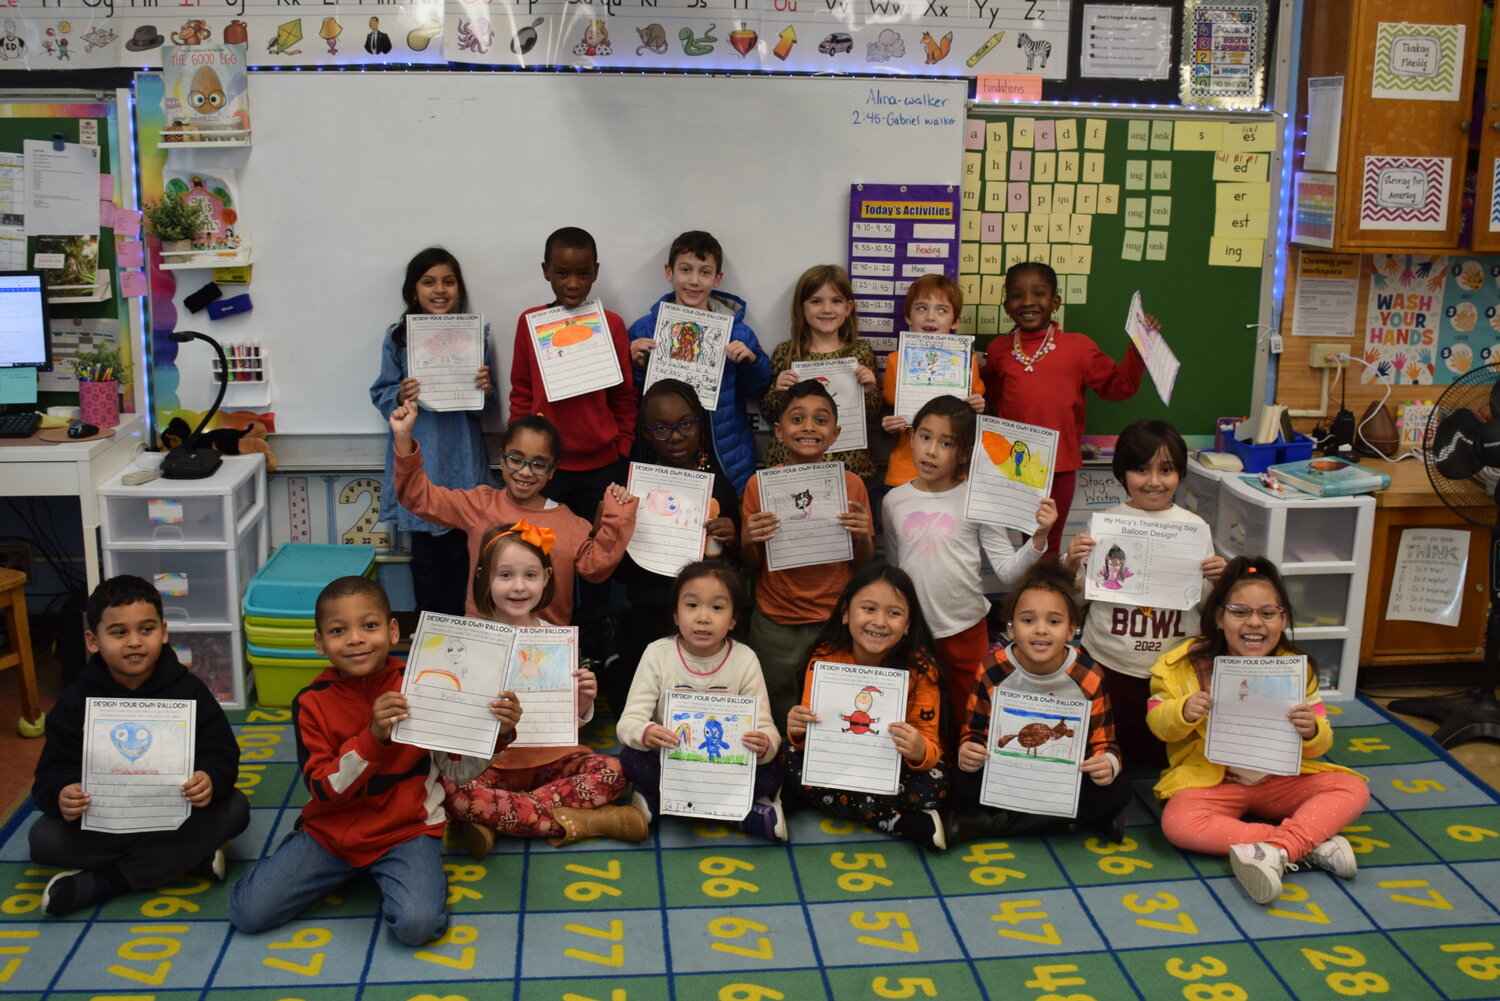 Cornwell Avenue students celebrated Thanksgiving with colorful drawings.